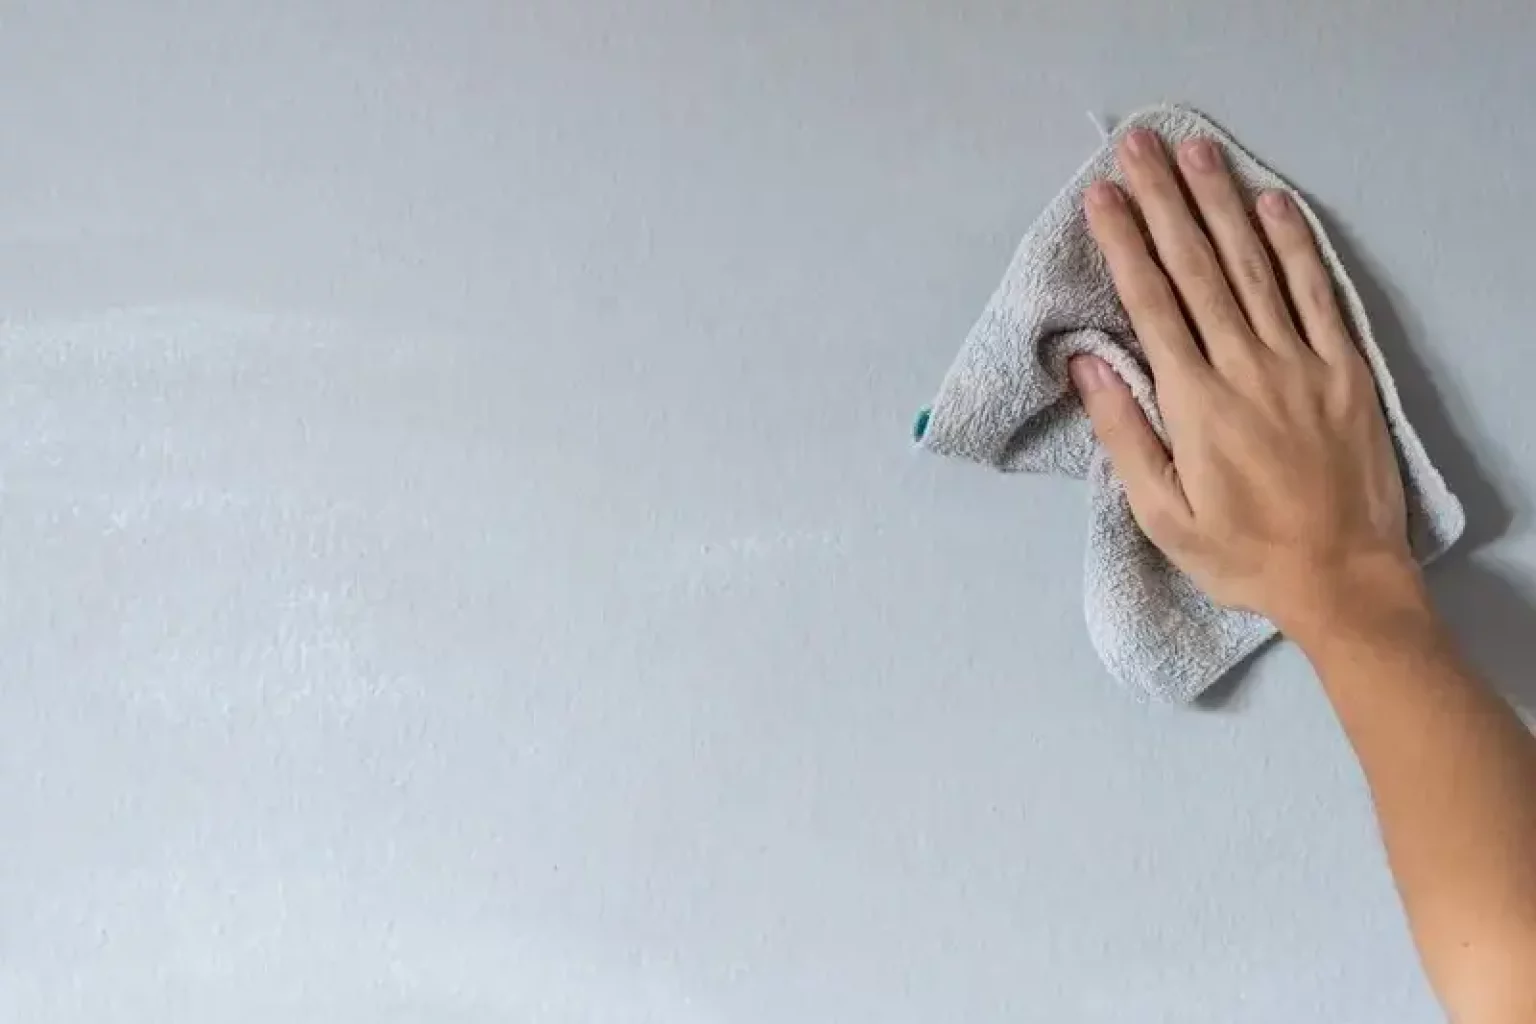 How to Clean Flat Walls